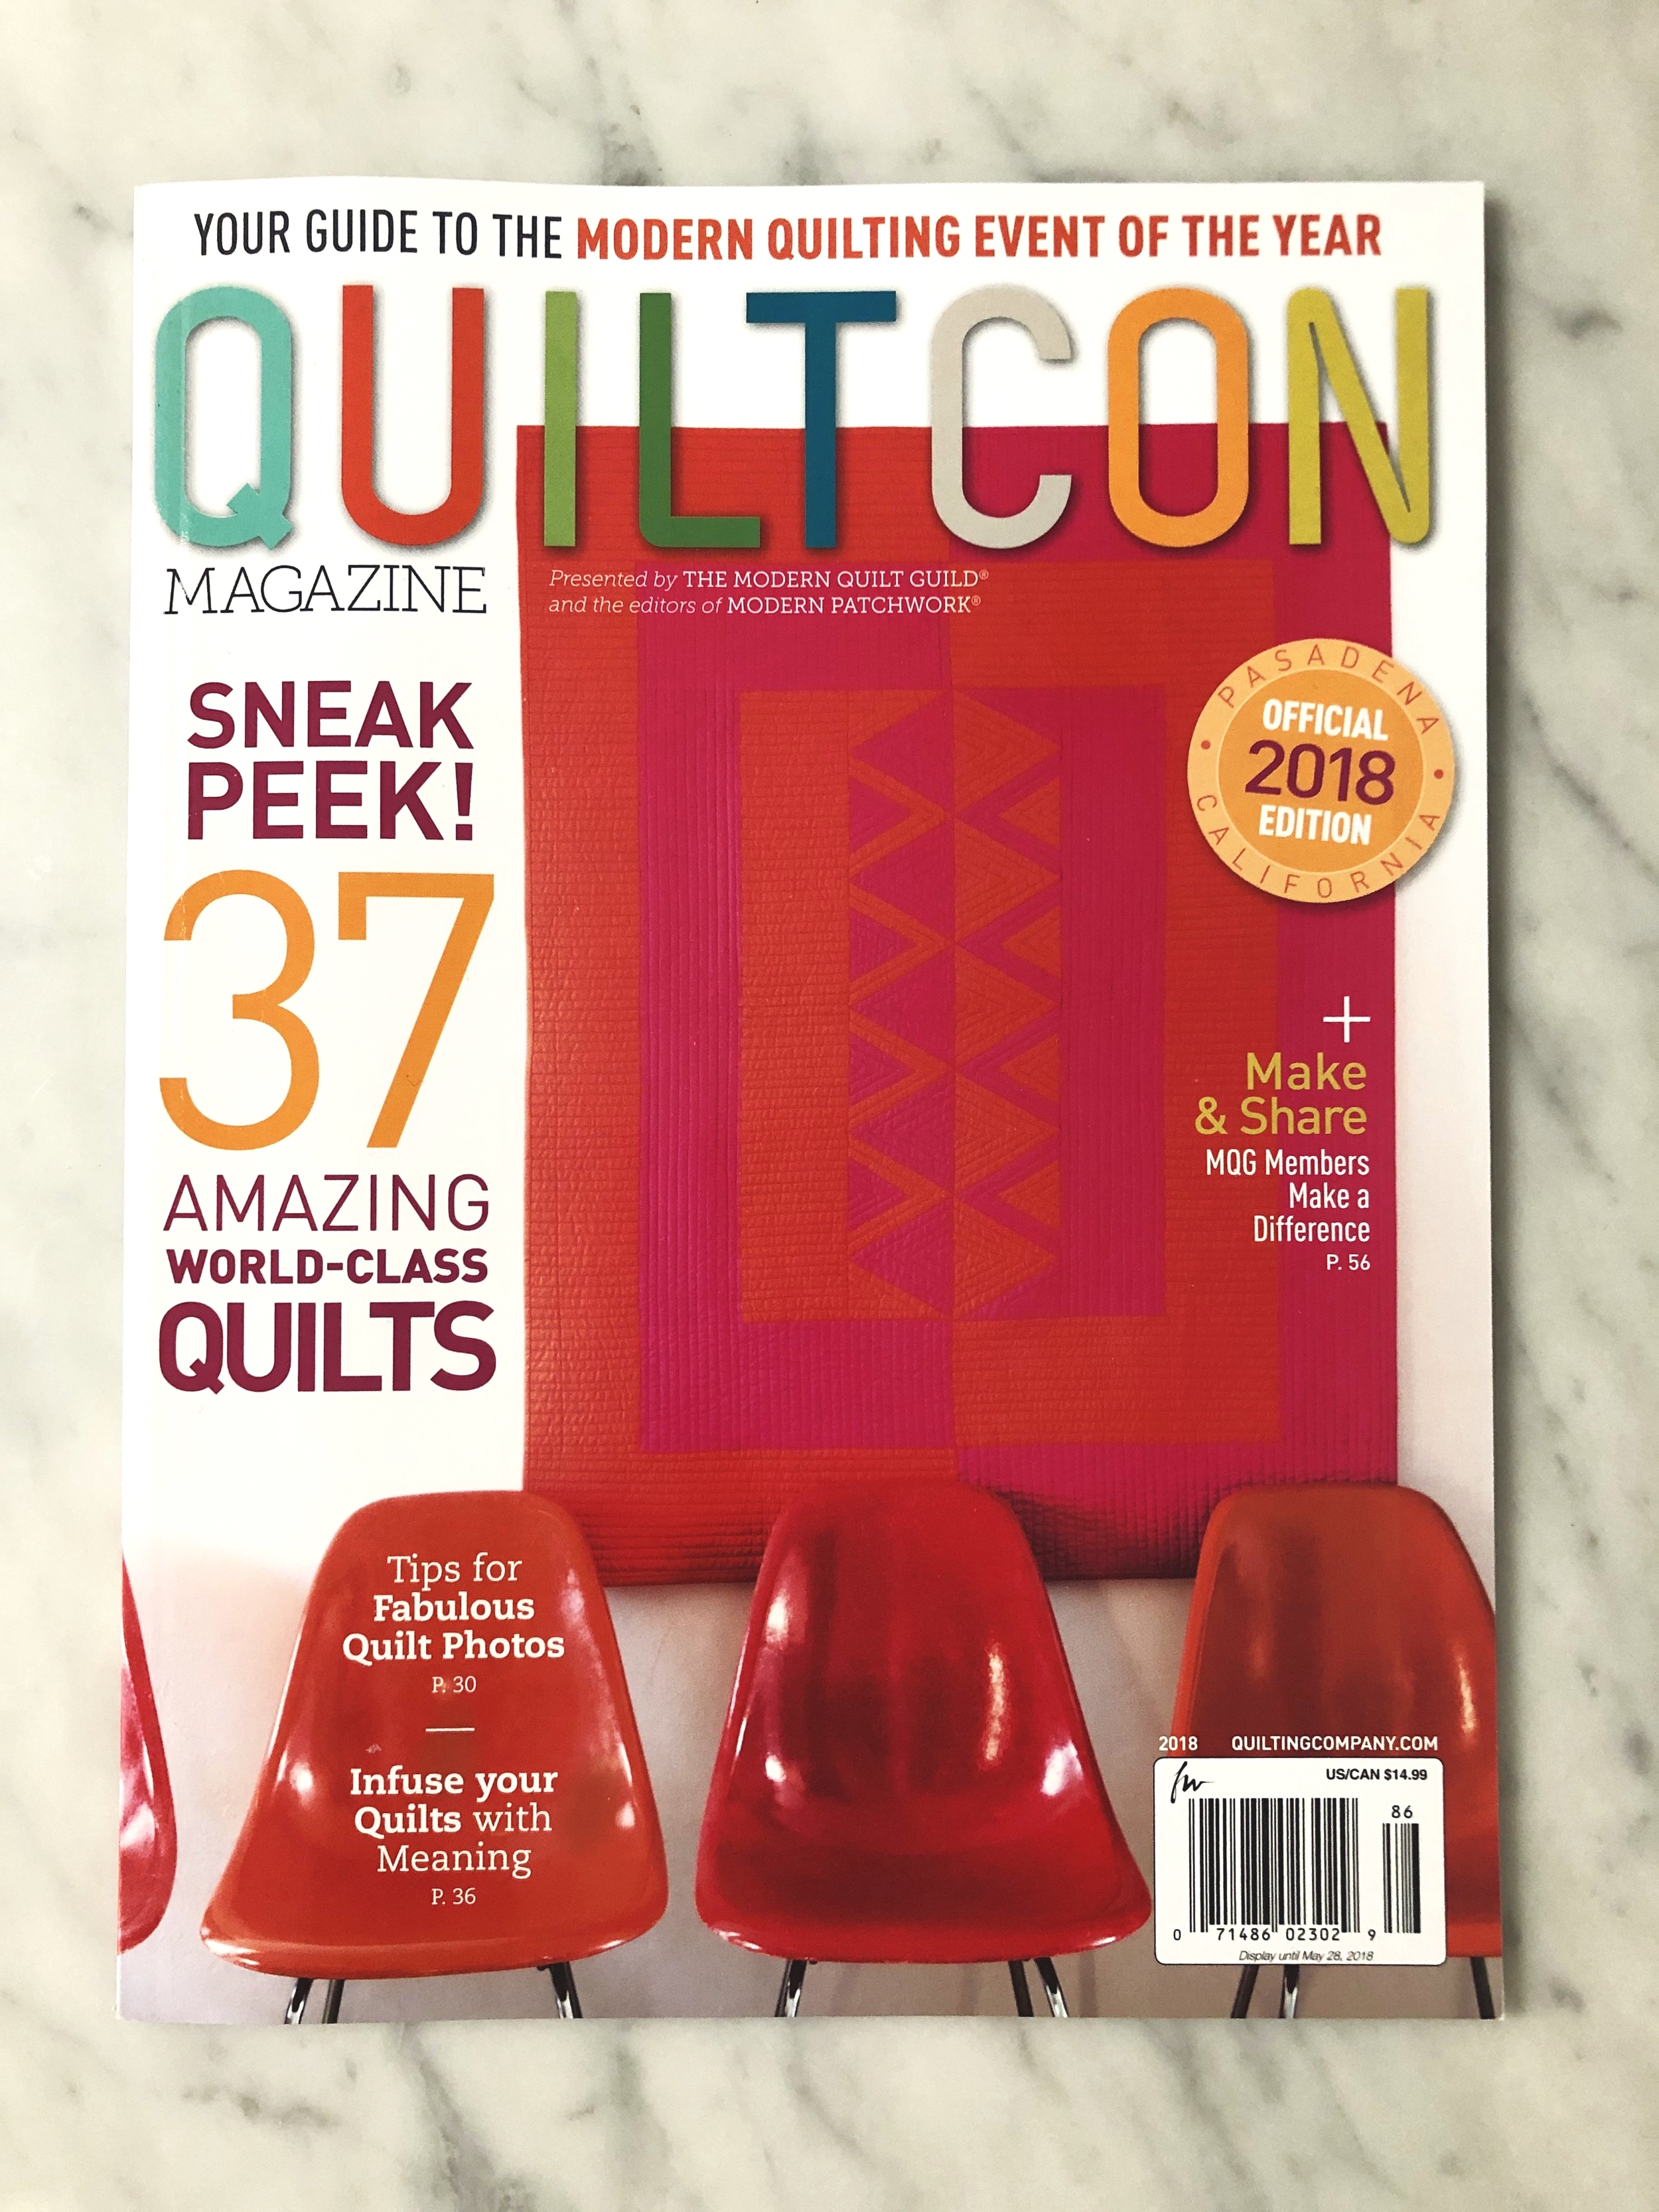 Quiltcon